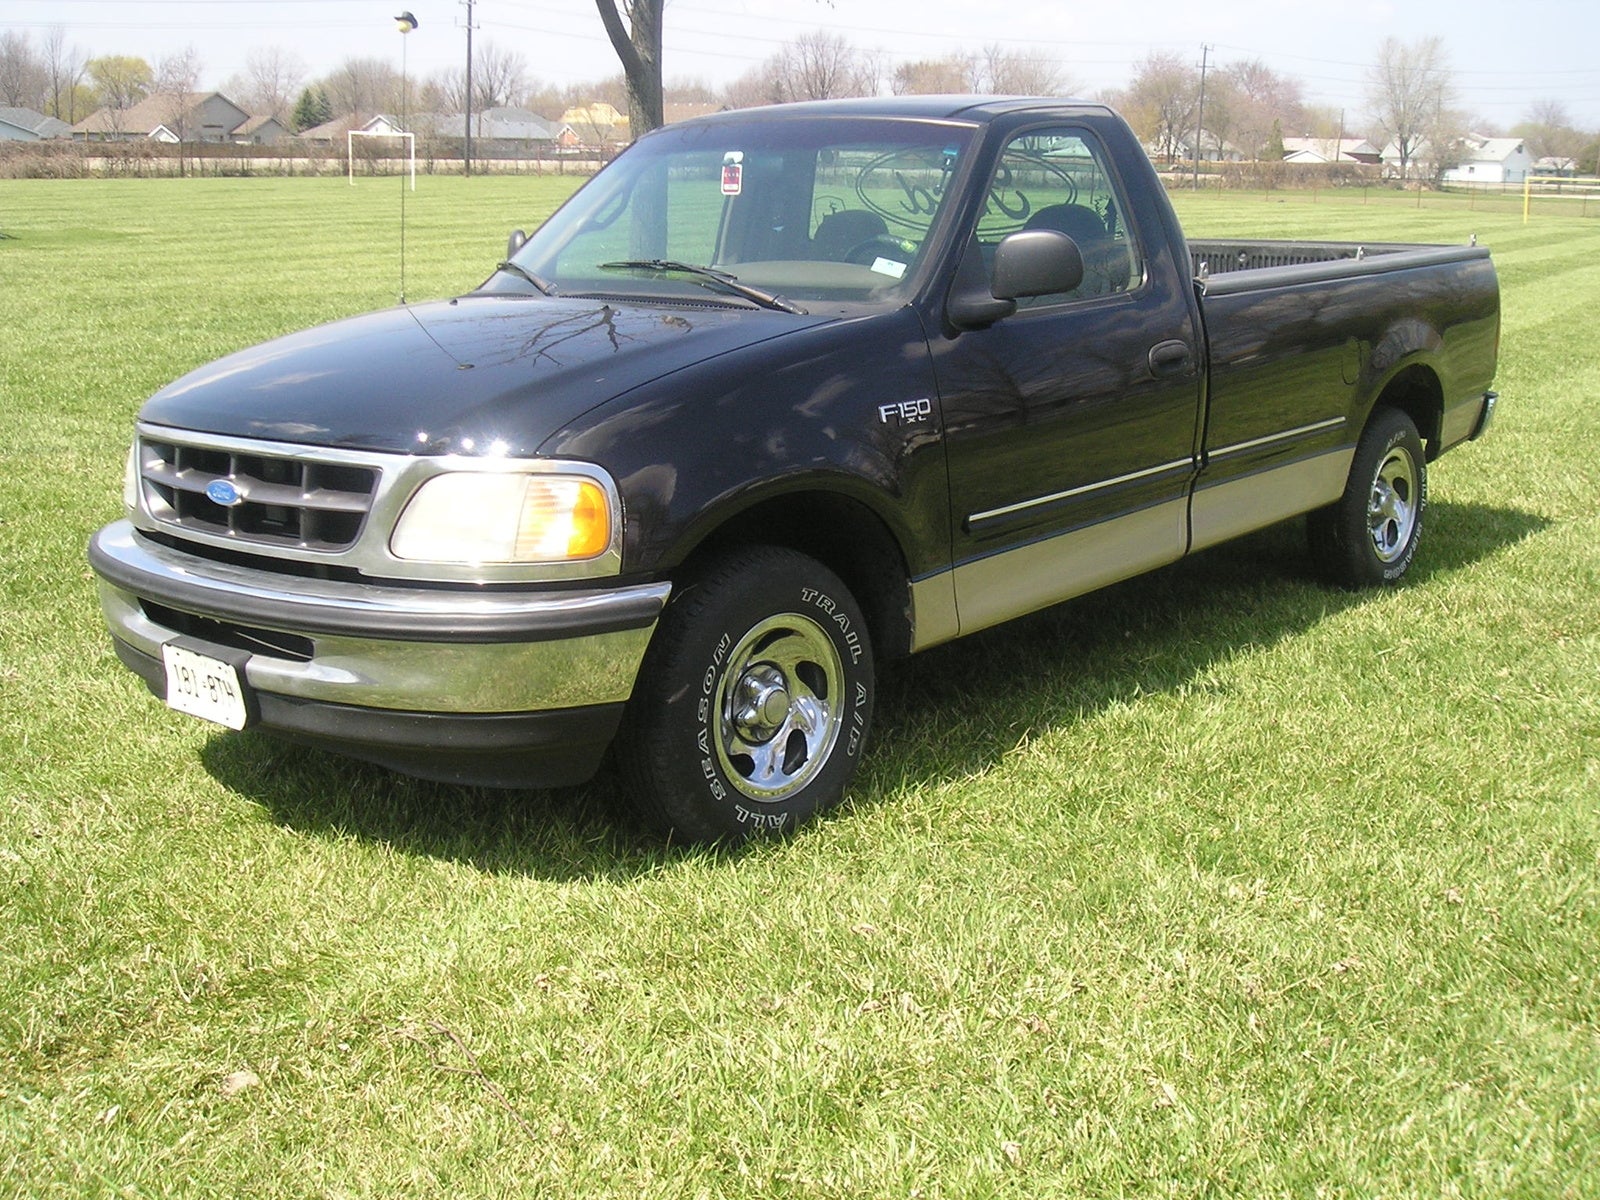 1997 Ford f150 xlt 4x4 review #8